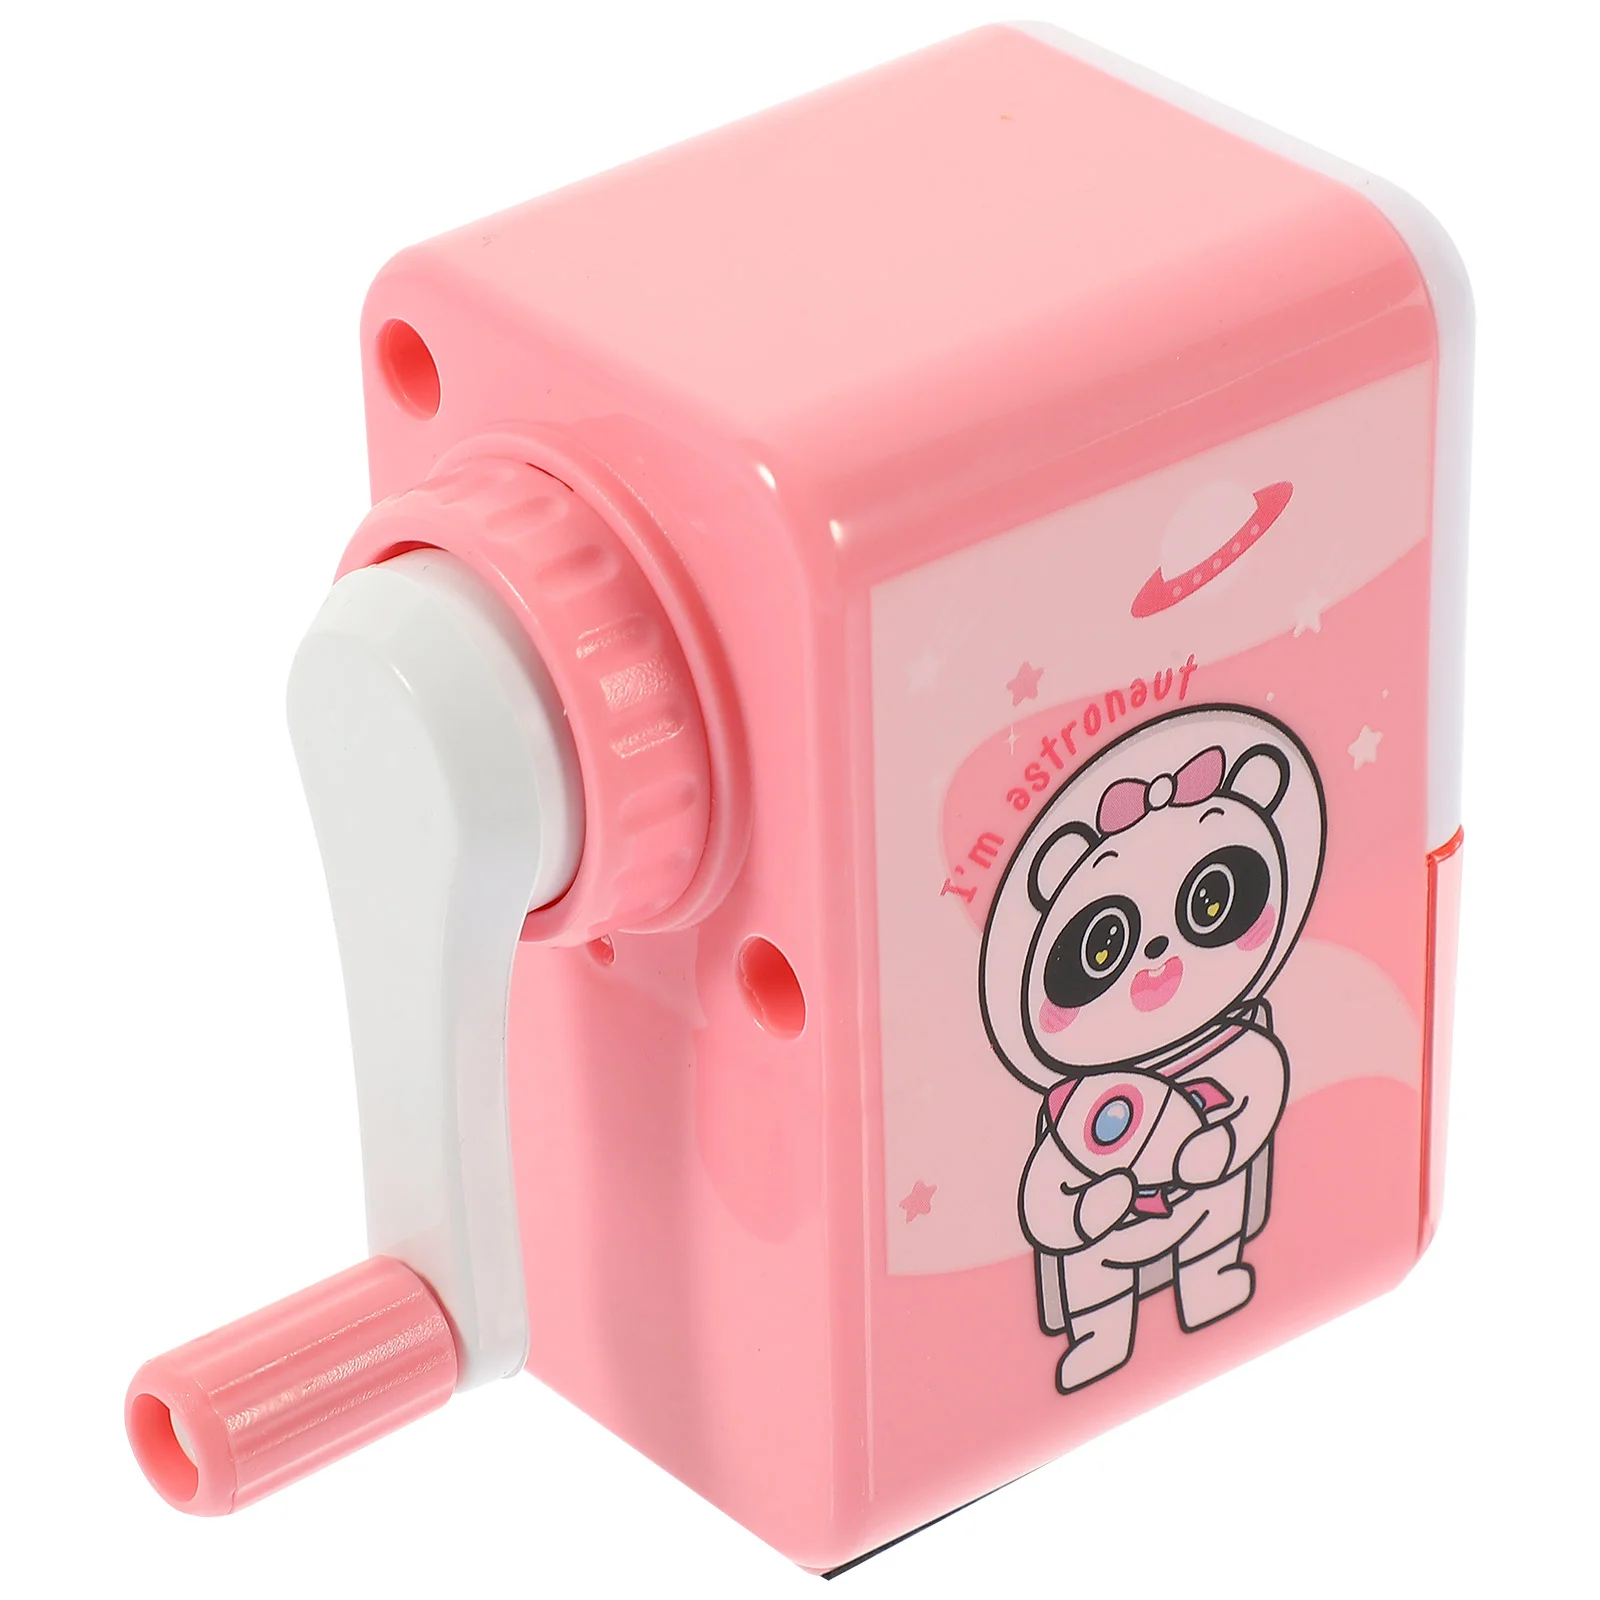 

Pencil Sharpener Convenient Sharpeners Kids Accessories Compact Small Lovely Hand Portable